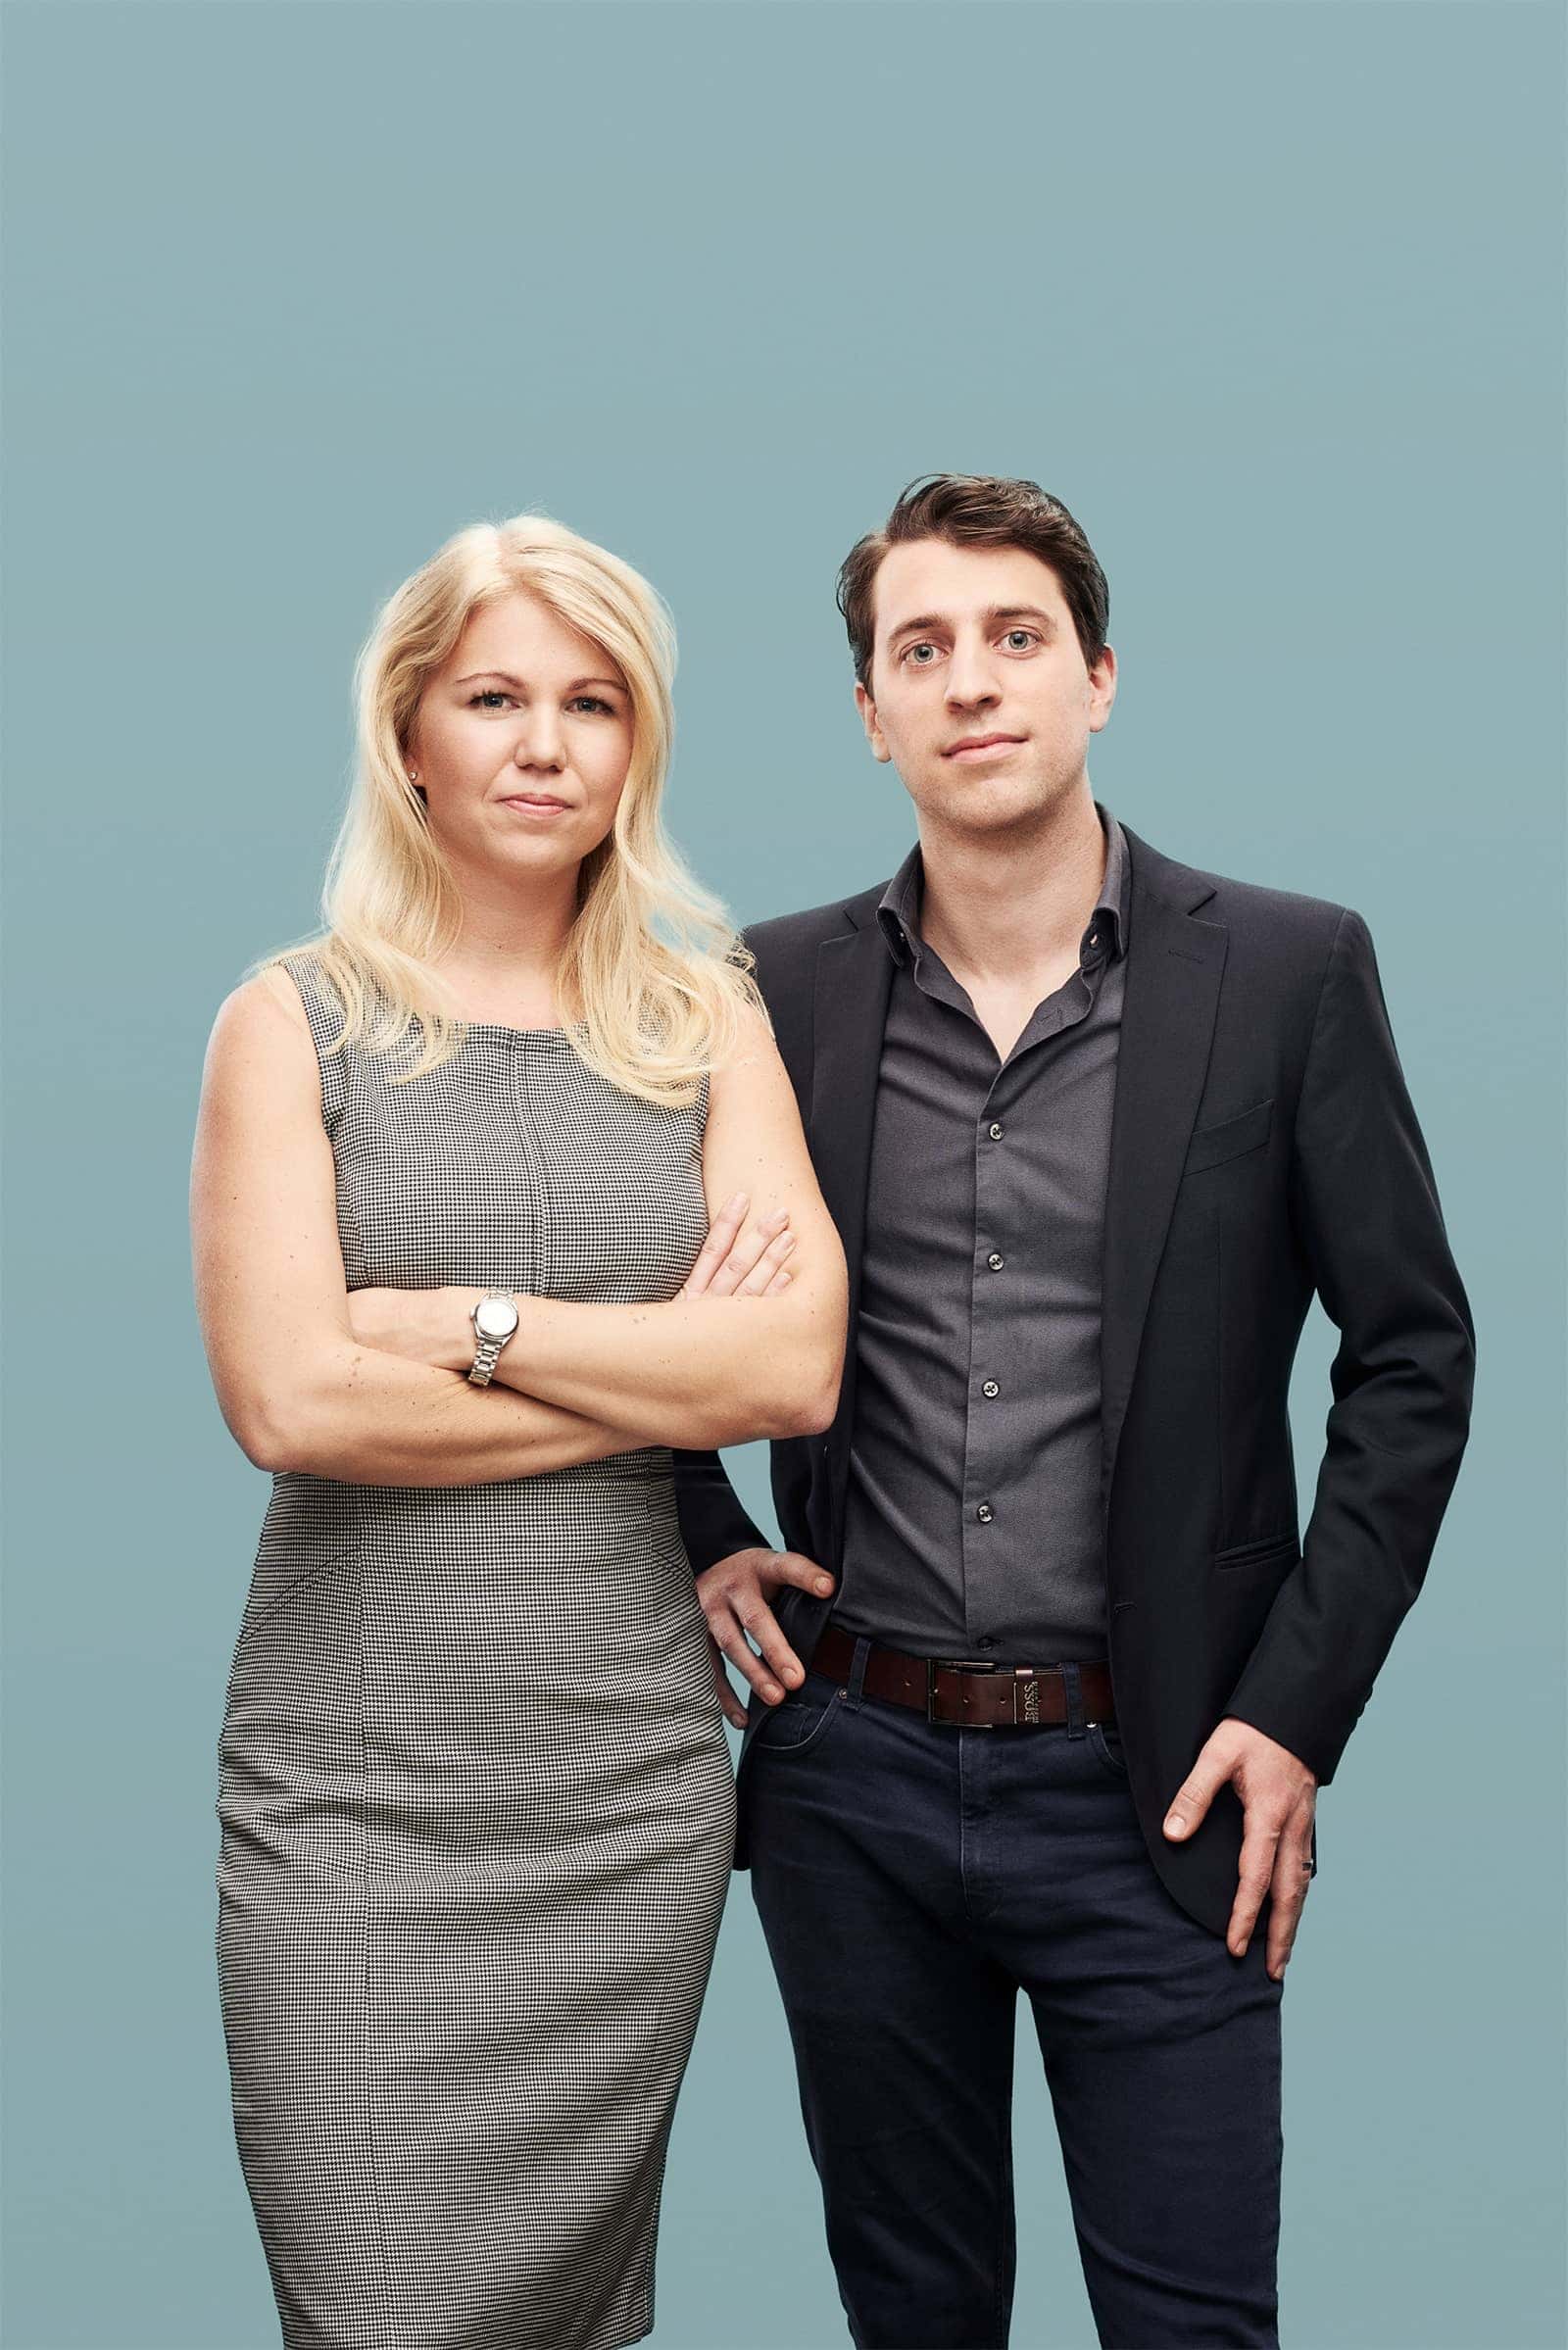 Co-founders of Natural Cycles birth control app Dr. Raoul Scherwitzl and Dr. Elina Berglund.